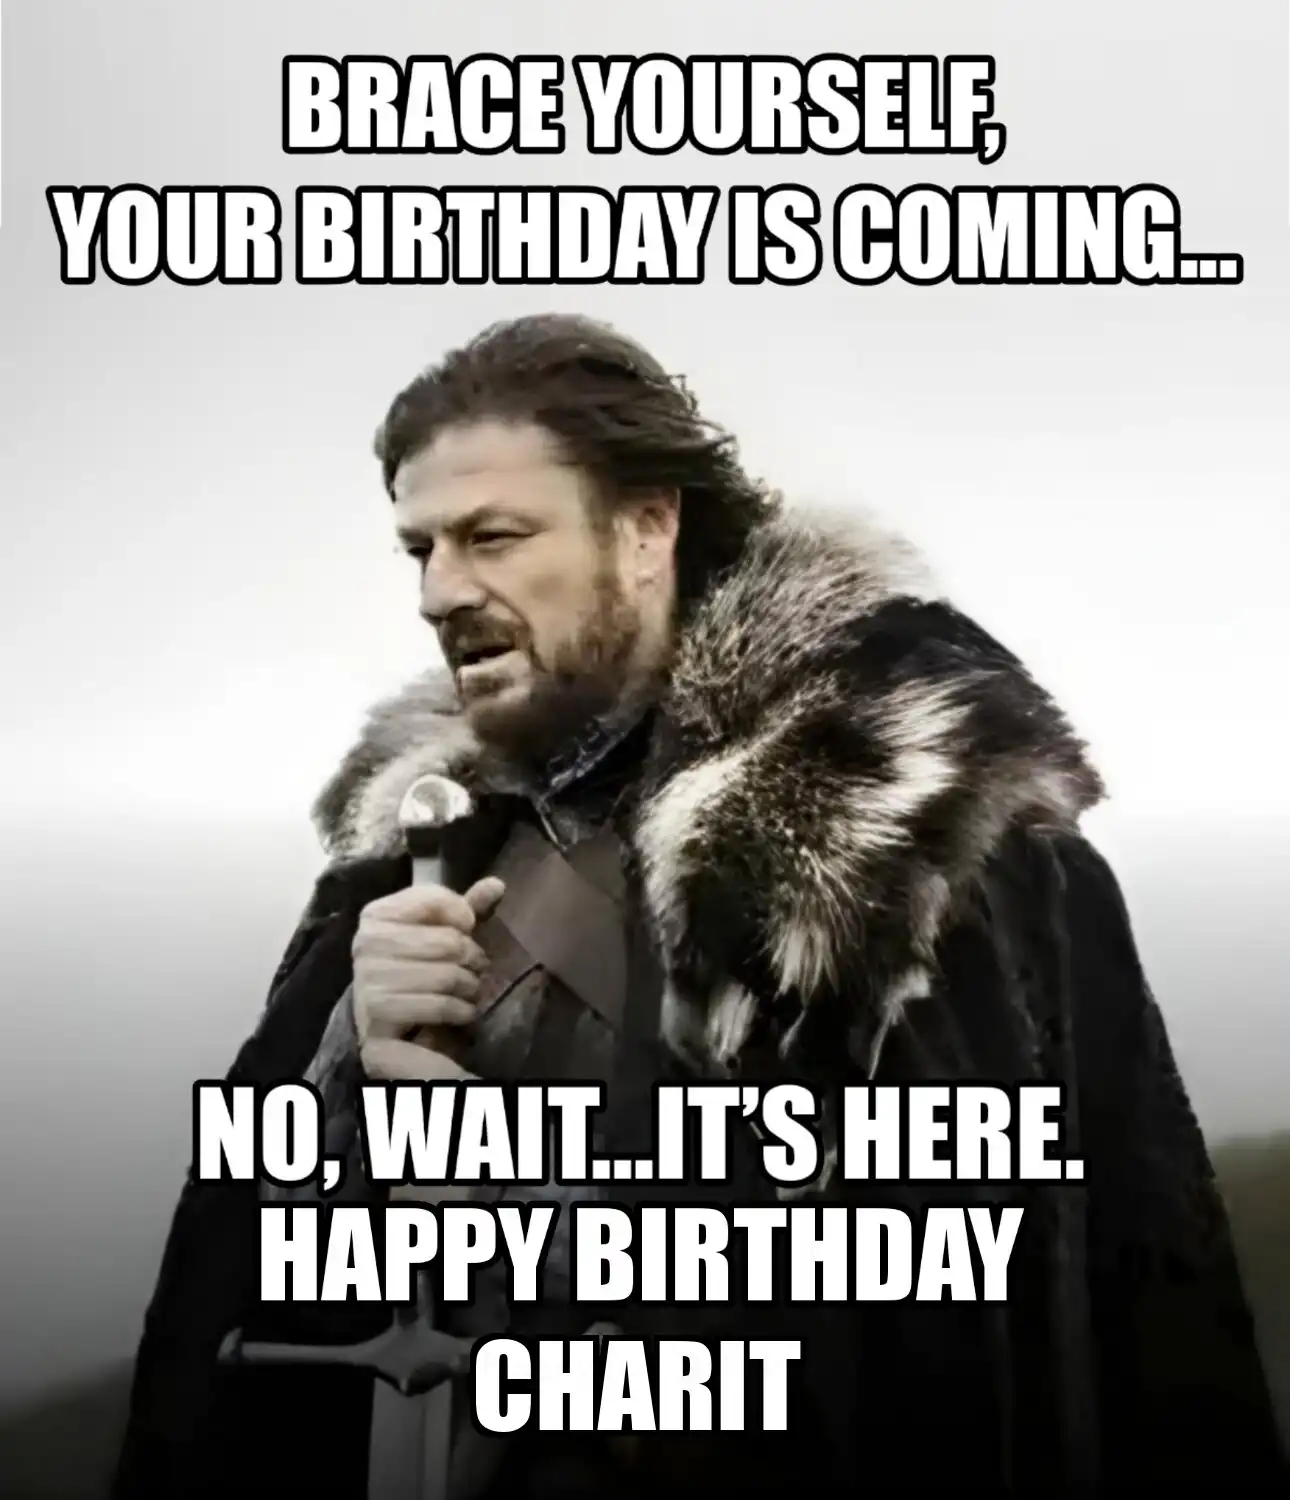 Happy Birthday Charit Brace Yourself Your Birthday Is Coming Meme